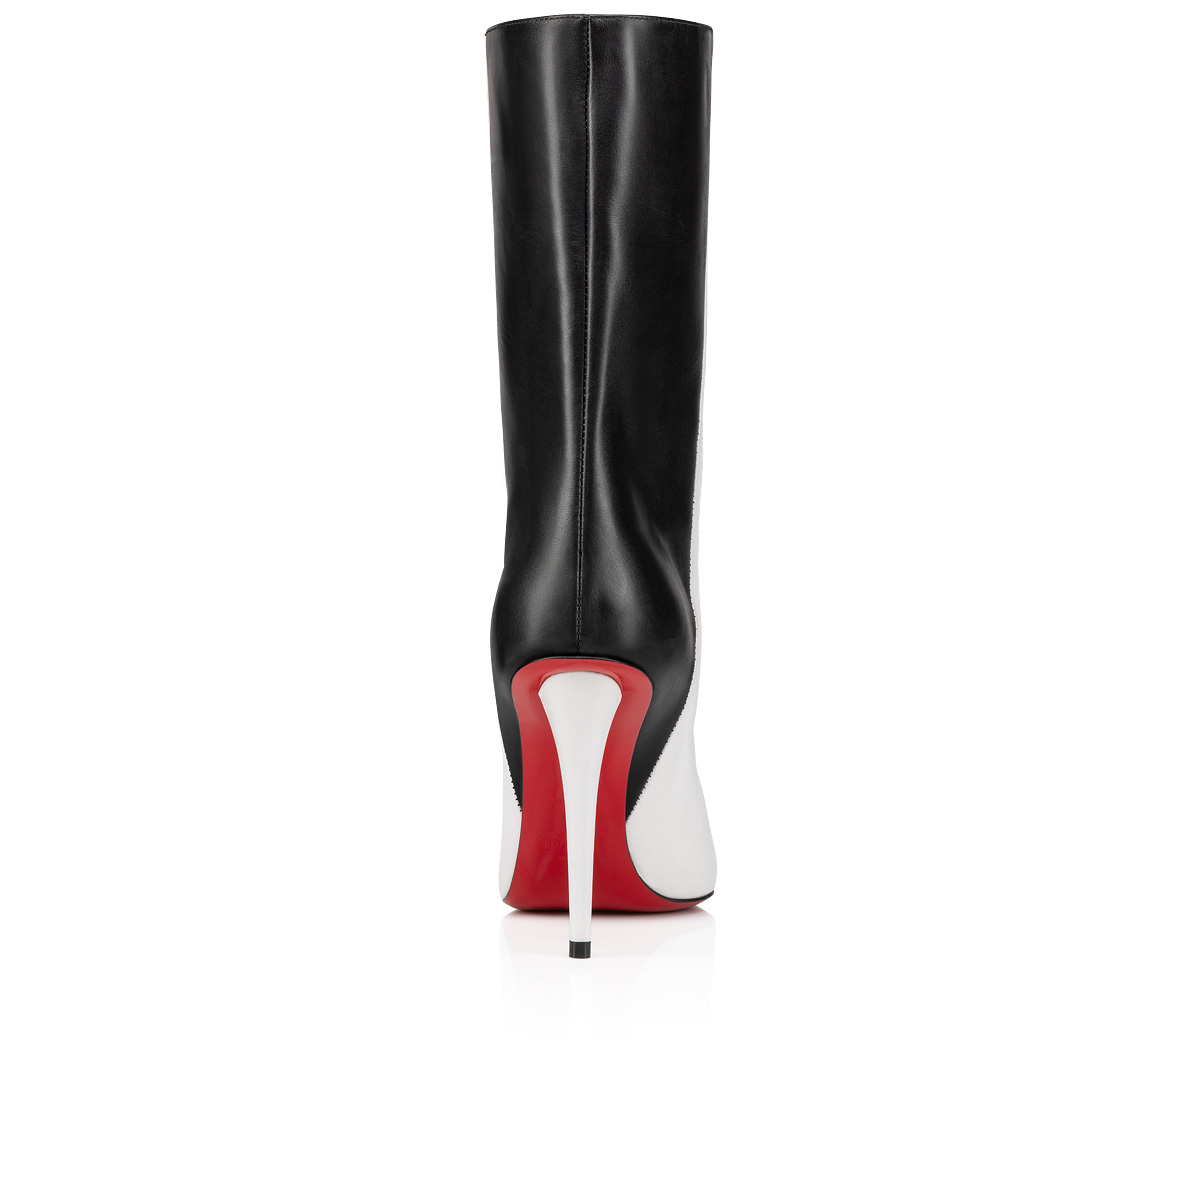 Christian Louboutin Womens Bianco/Black Astrilarge Booty 100 Leather Heeled Boots 4.5